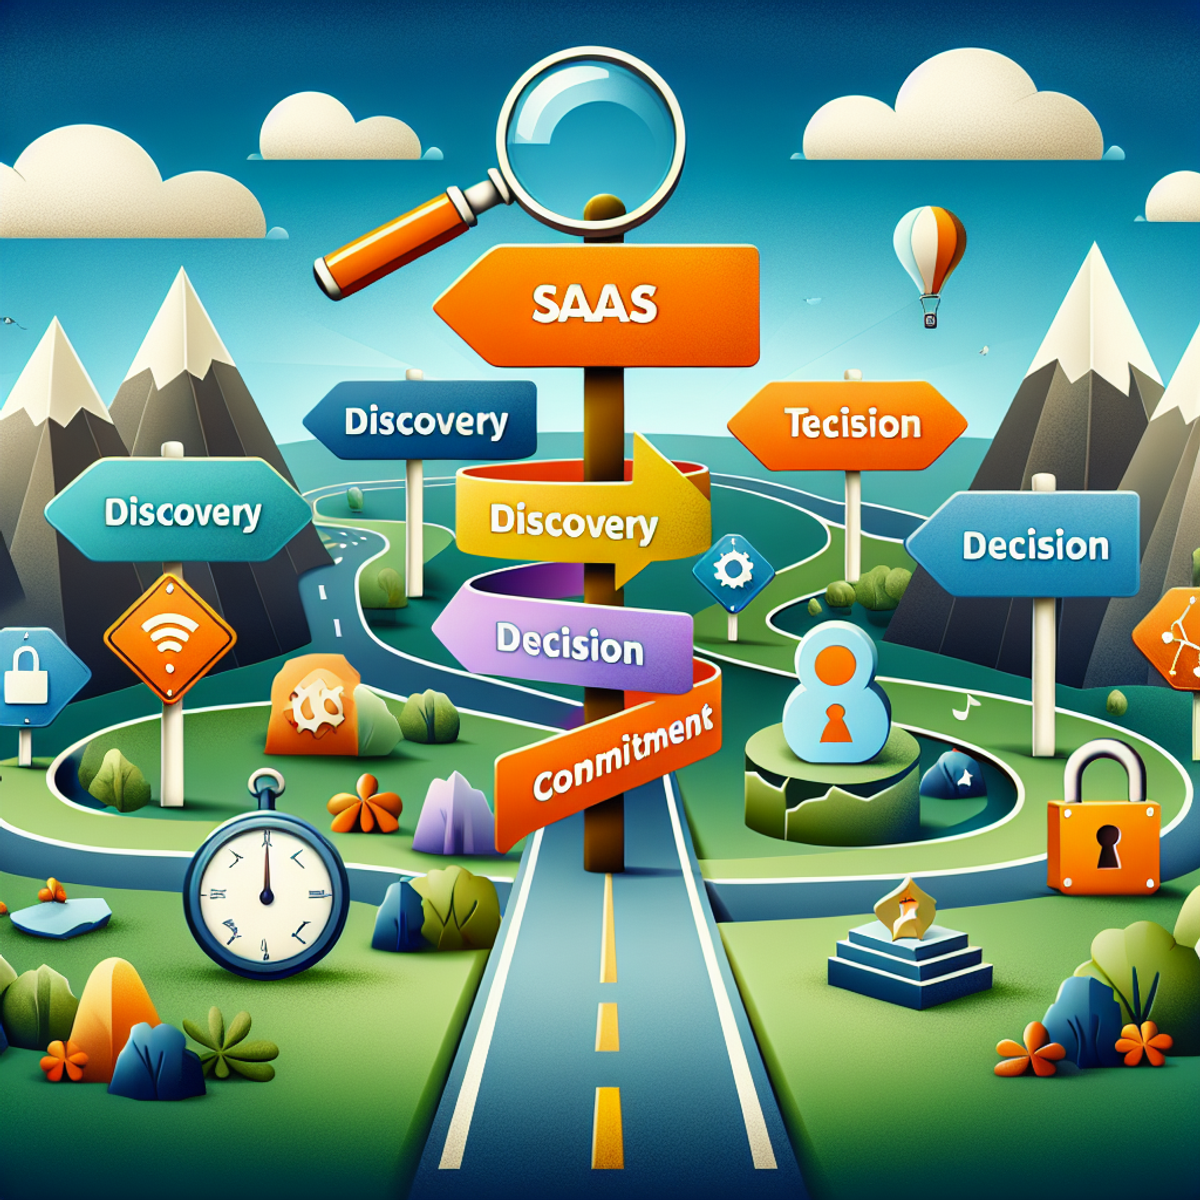 Alt text: Conceptual image representing the SaaS buyer's journey with multicolored arrows pointing in different directions, symbolic objects like a magnifying glass, weighing scale, and locked padlock, set in a landscape suggesting a long journey.